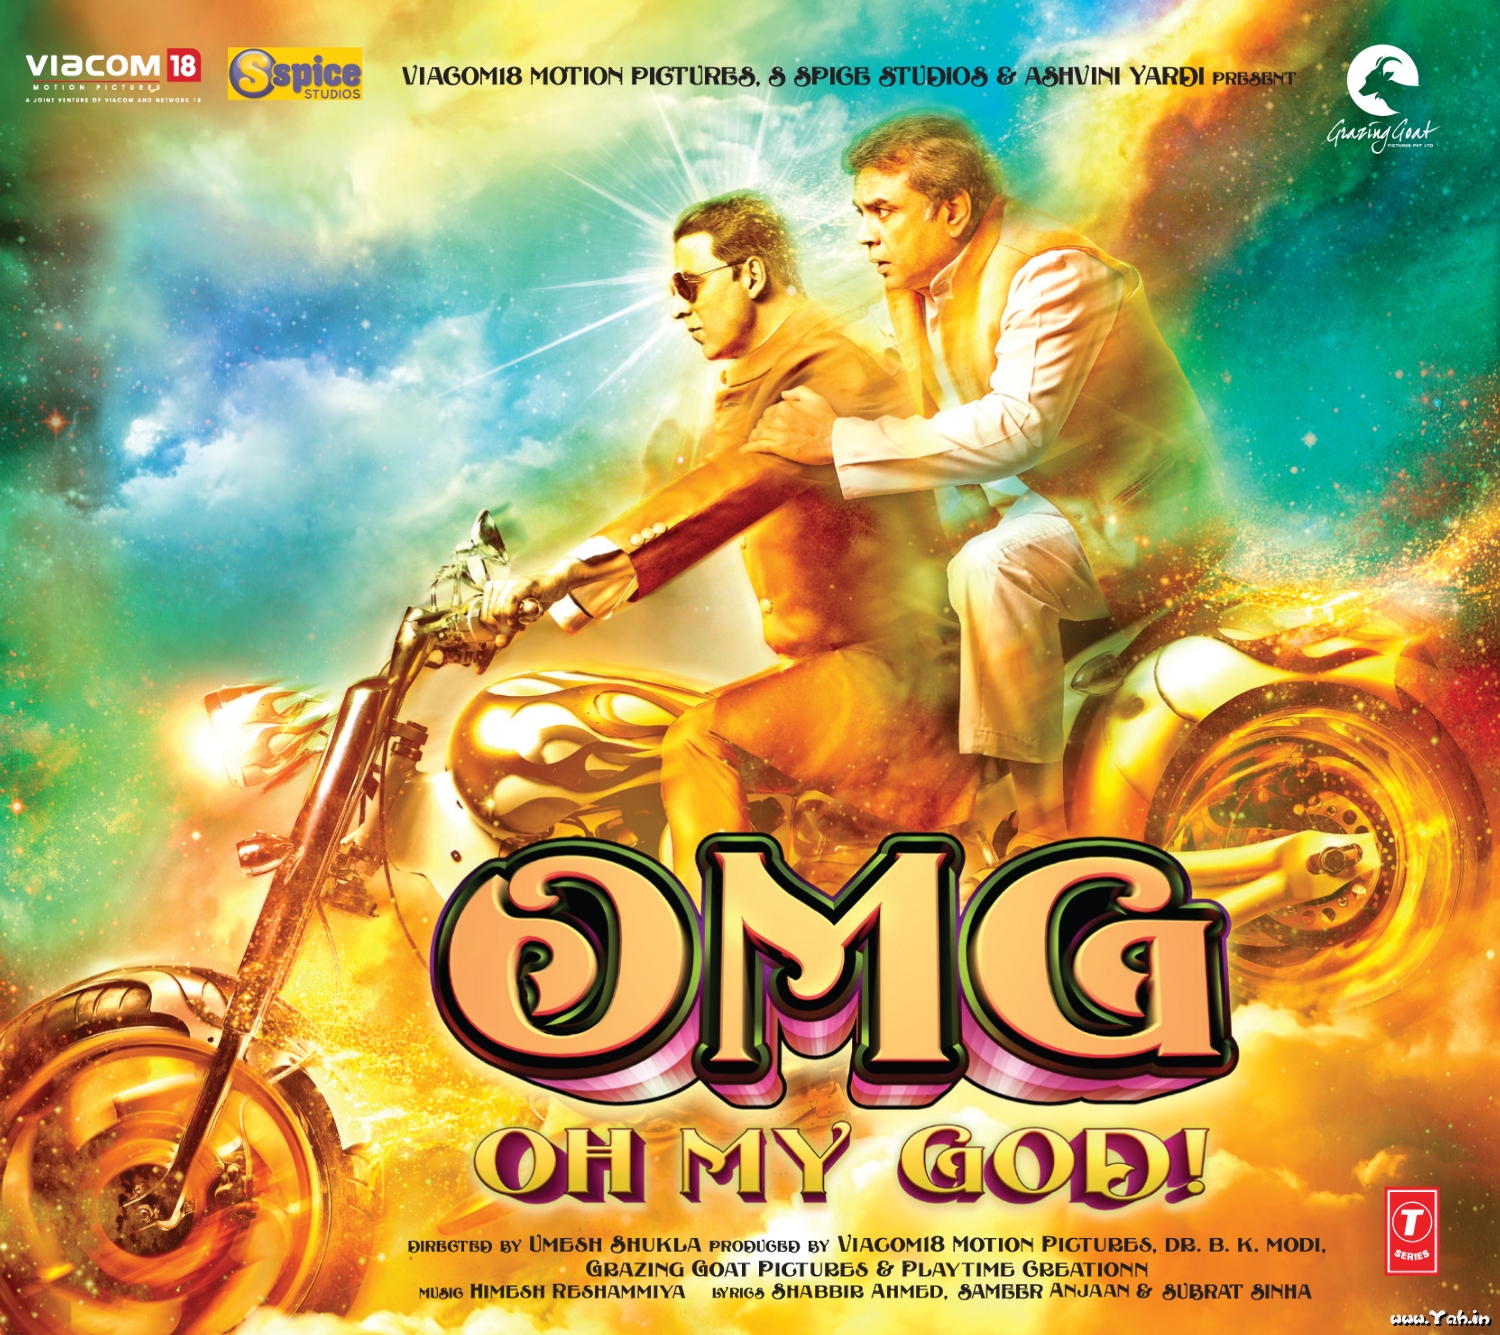 Review: OMG (Oh My Gods!)